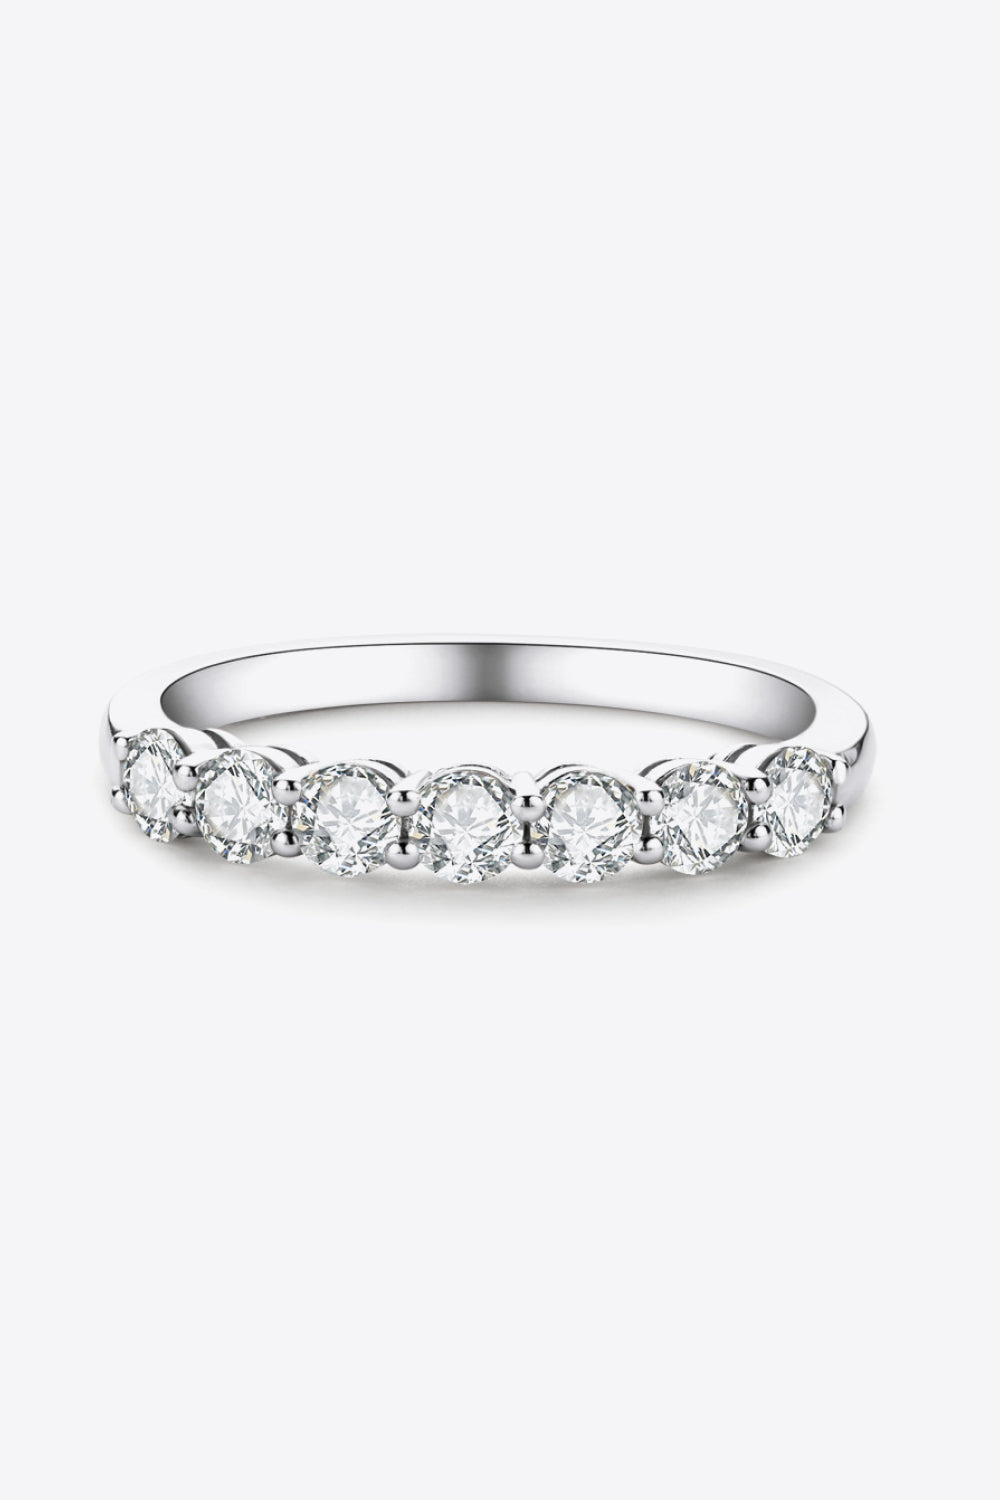 Can't Stop Your Shine Moissanite Platinum-Plated Ring - DromedarShop.com Online Boutique